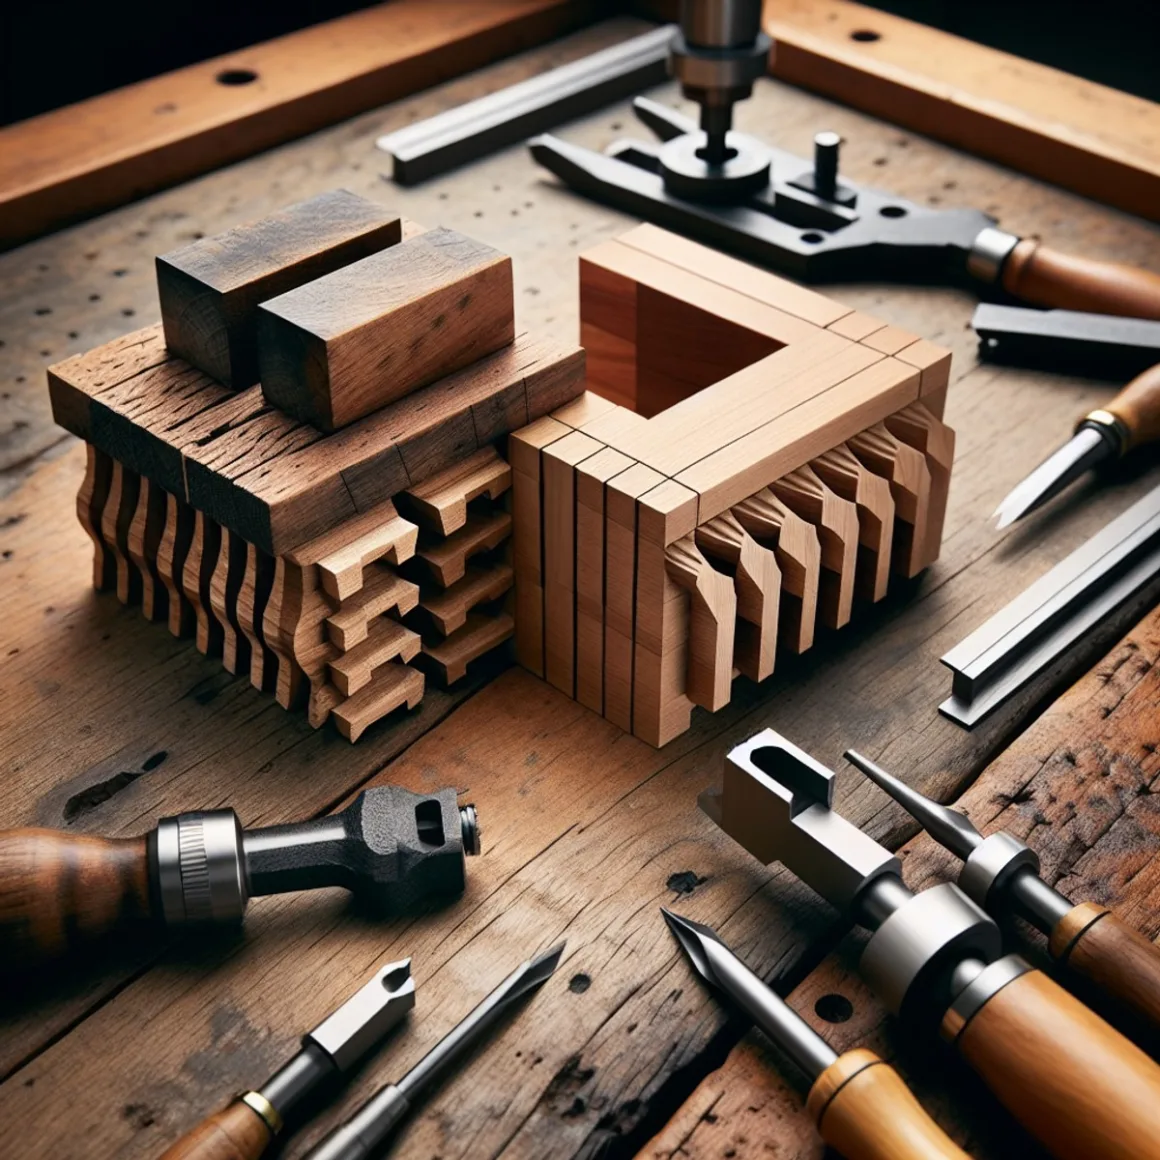 Traditional hand-crafted dovetail joint next to precision-cut machine-made dovetail joint on a wooden workbench.